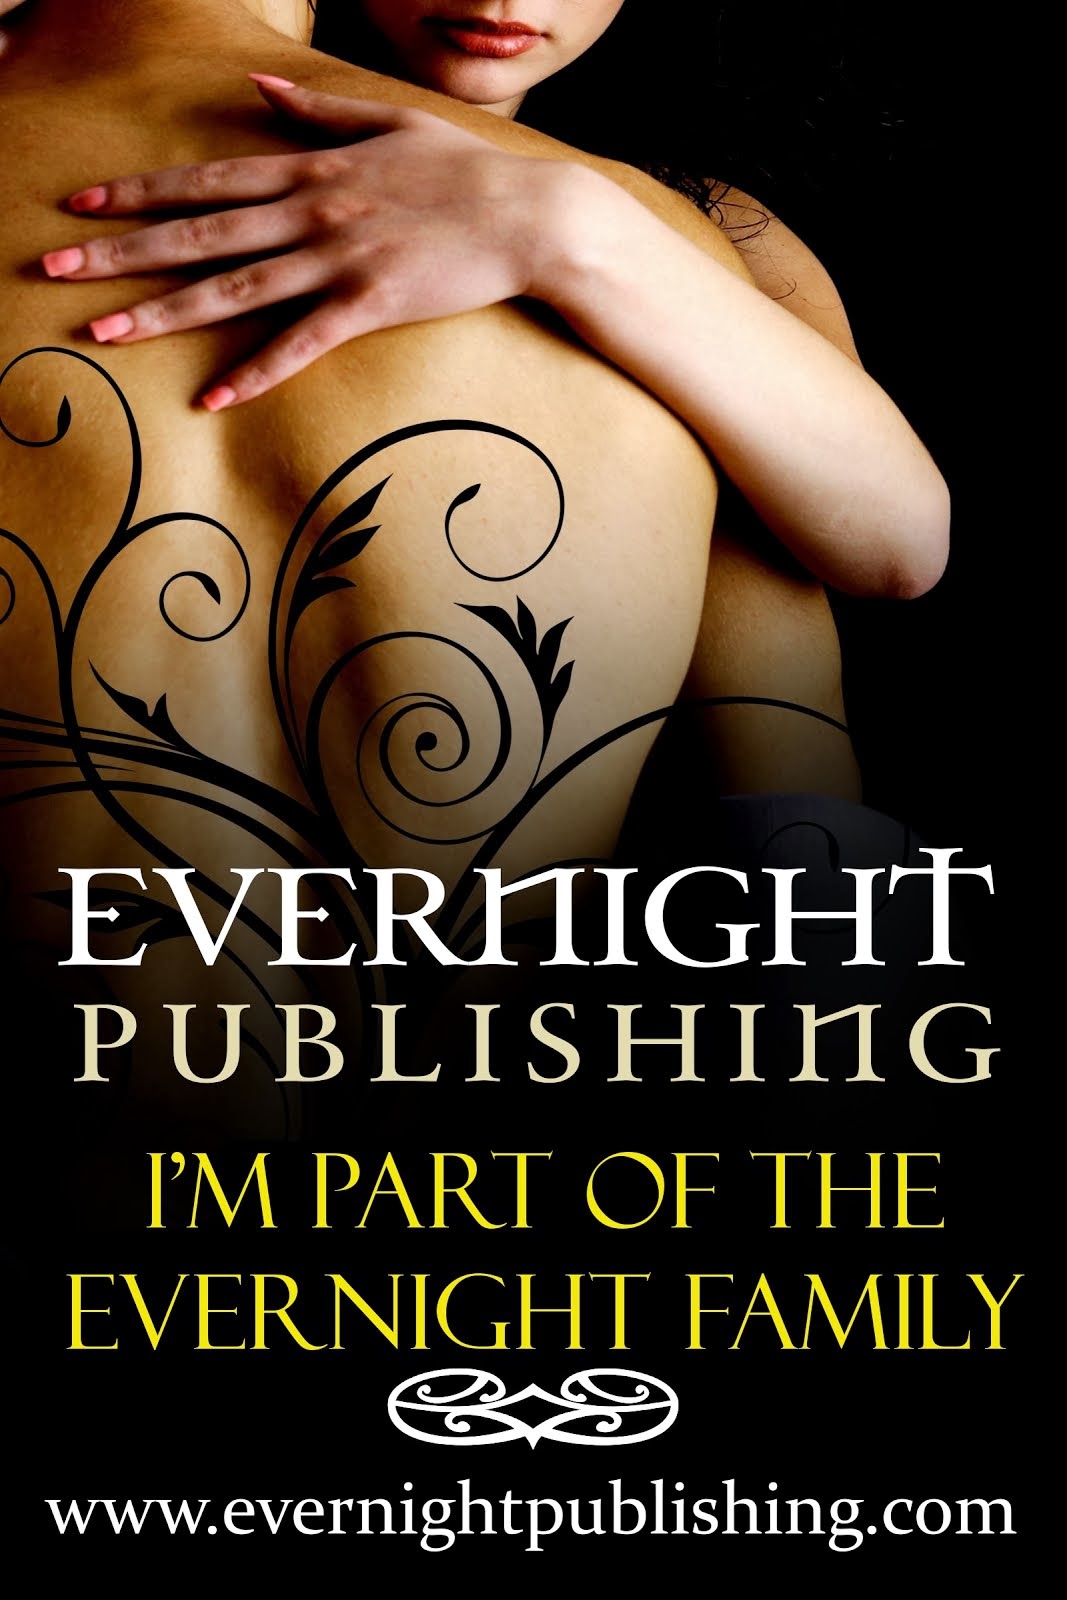 Find Me at Evernight Publishing!